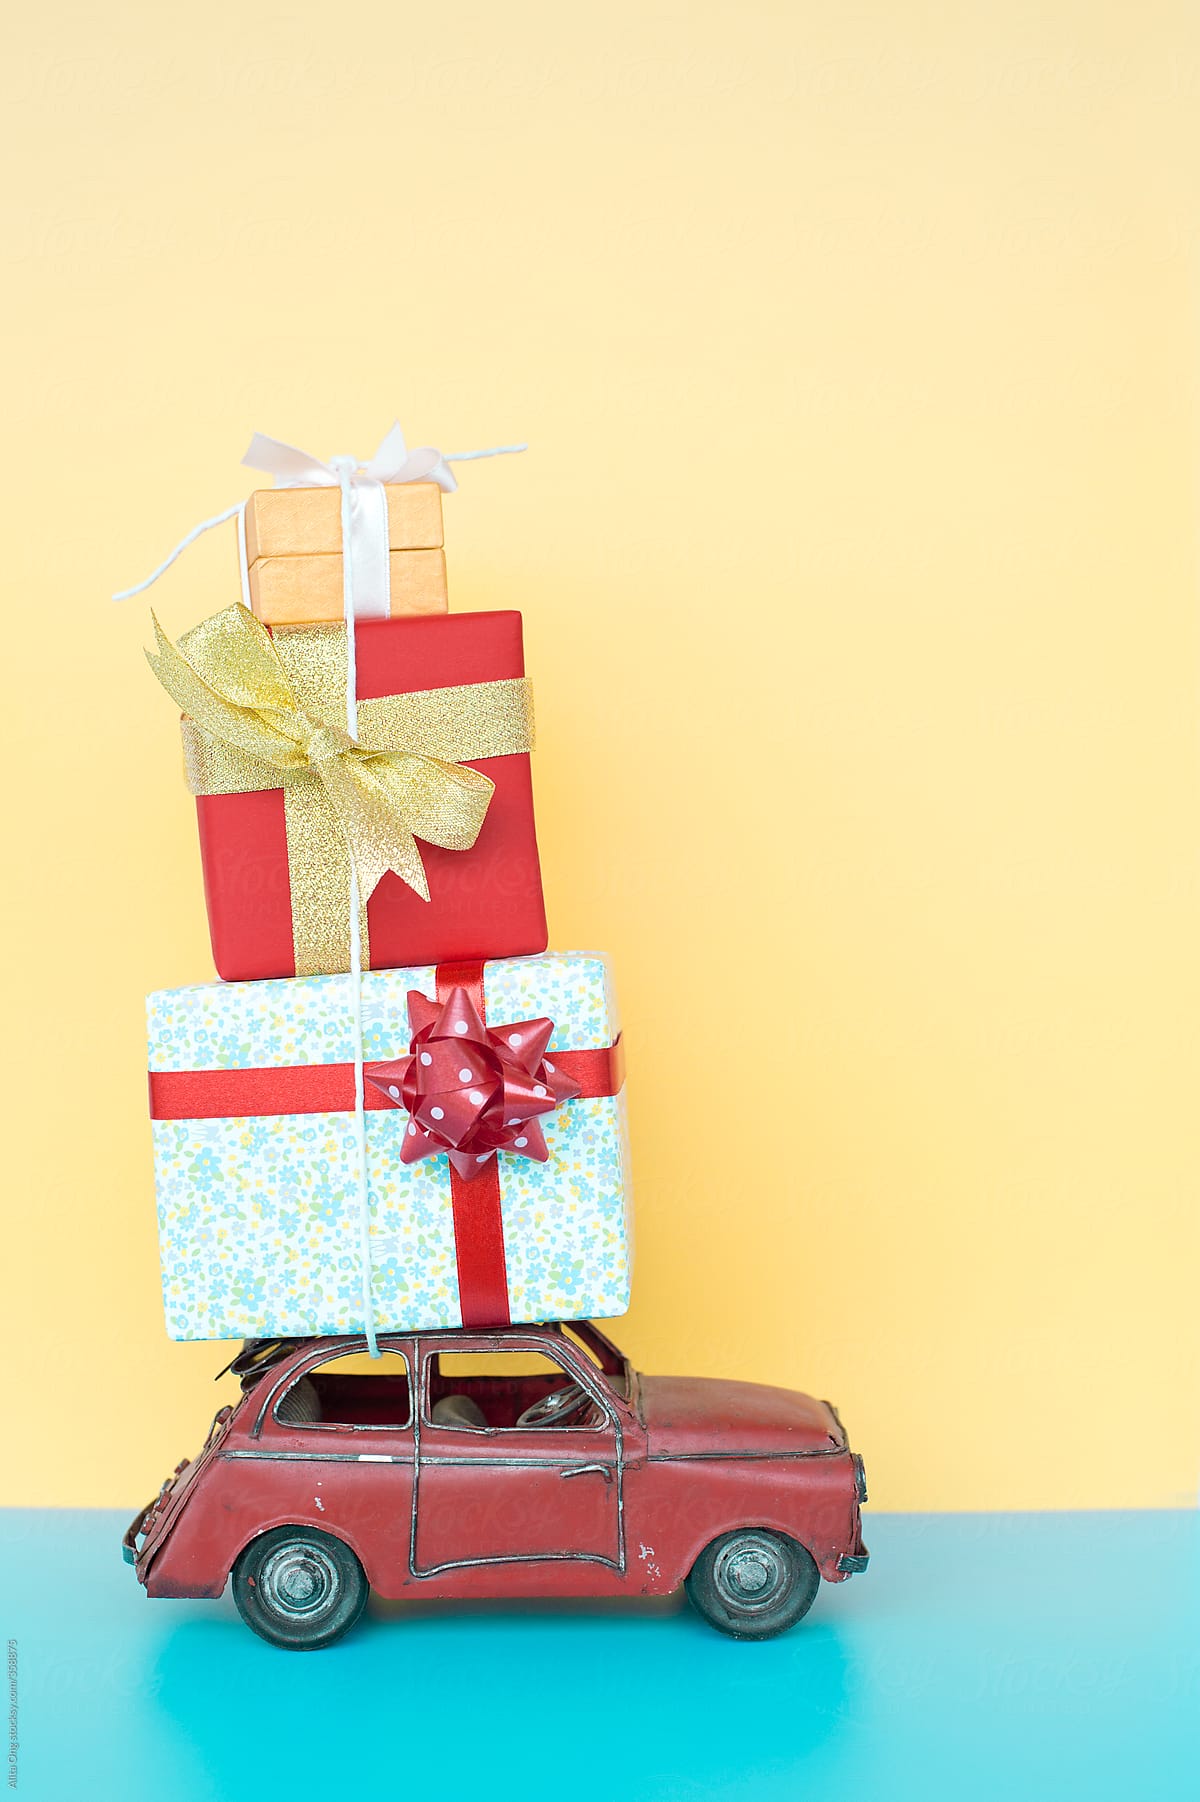 Three colorful gift boxes on vintage car